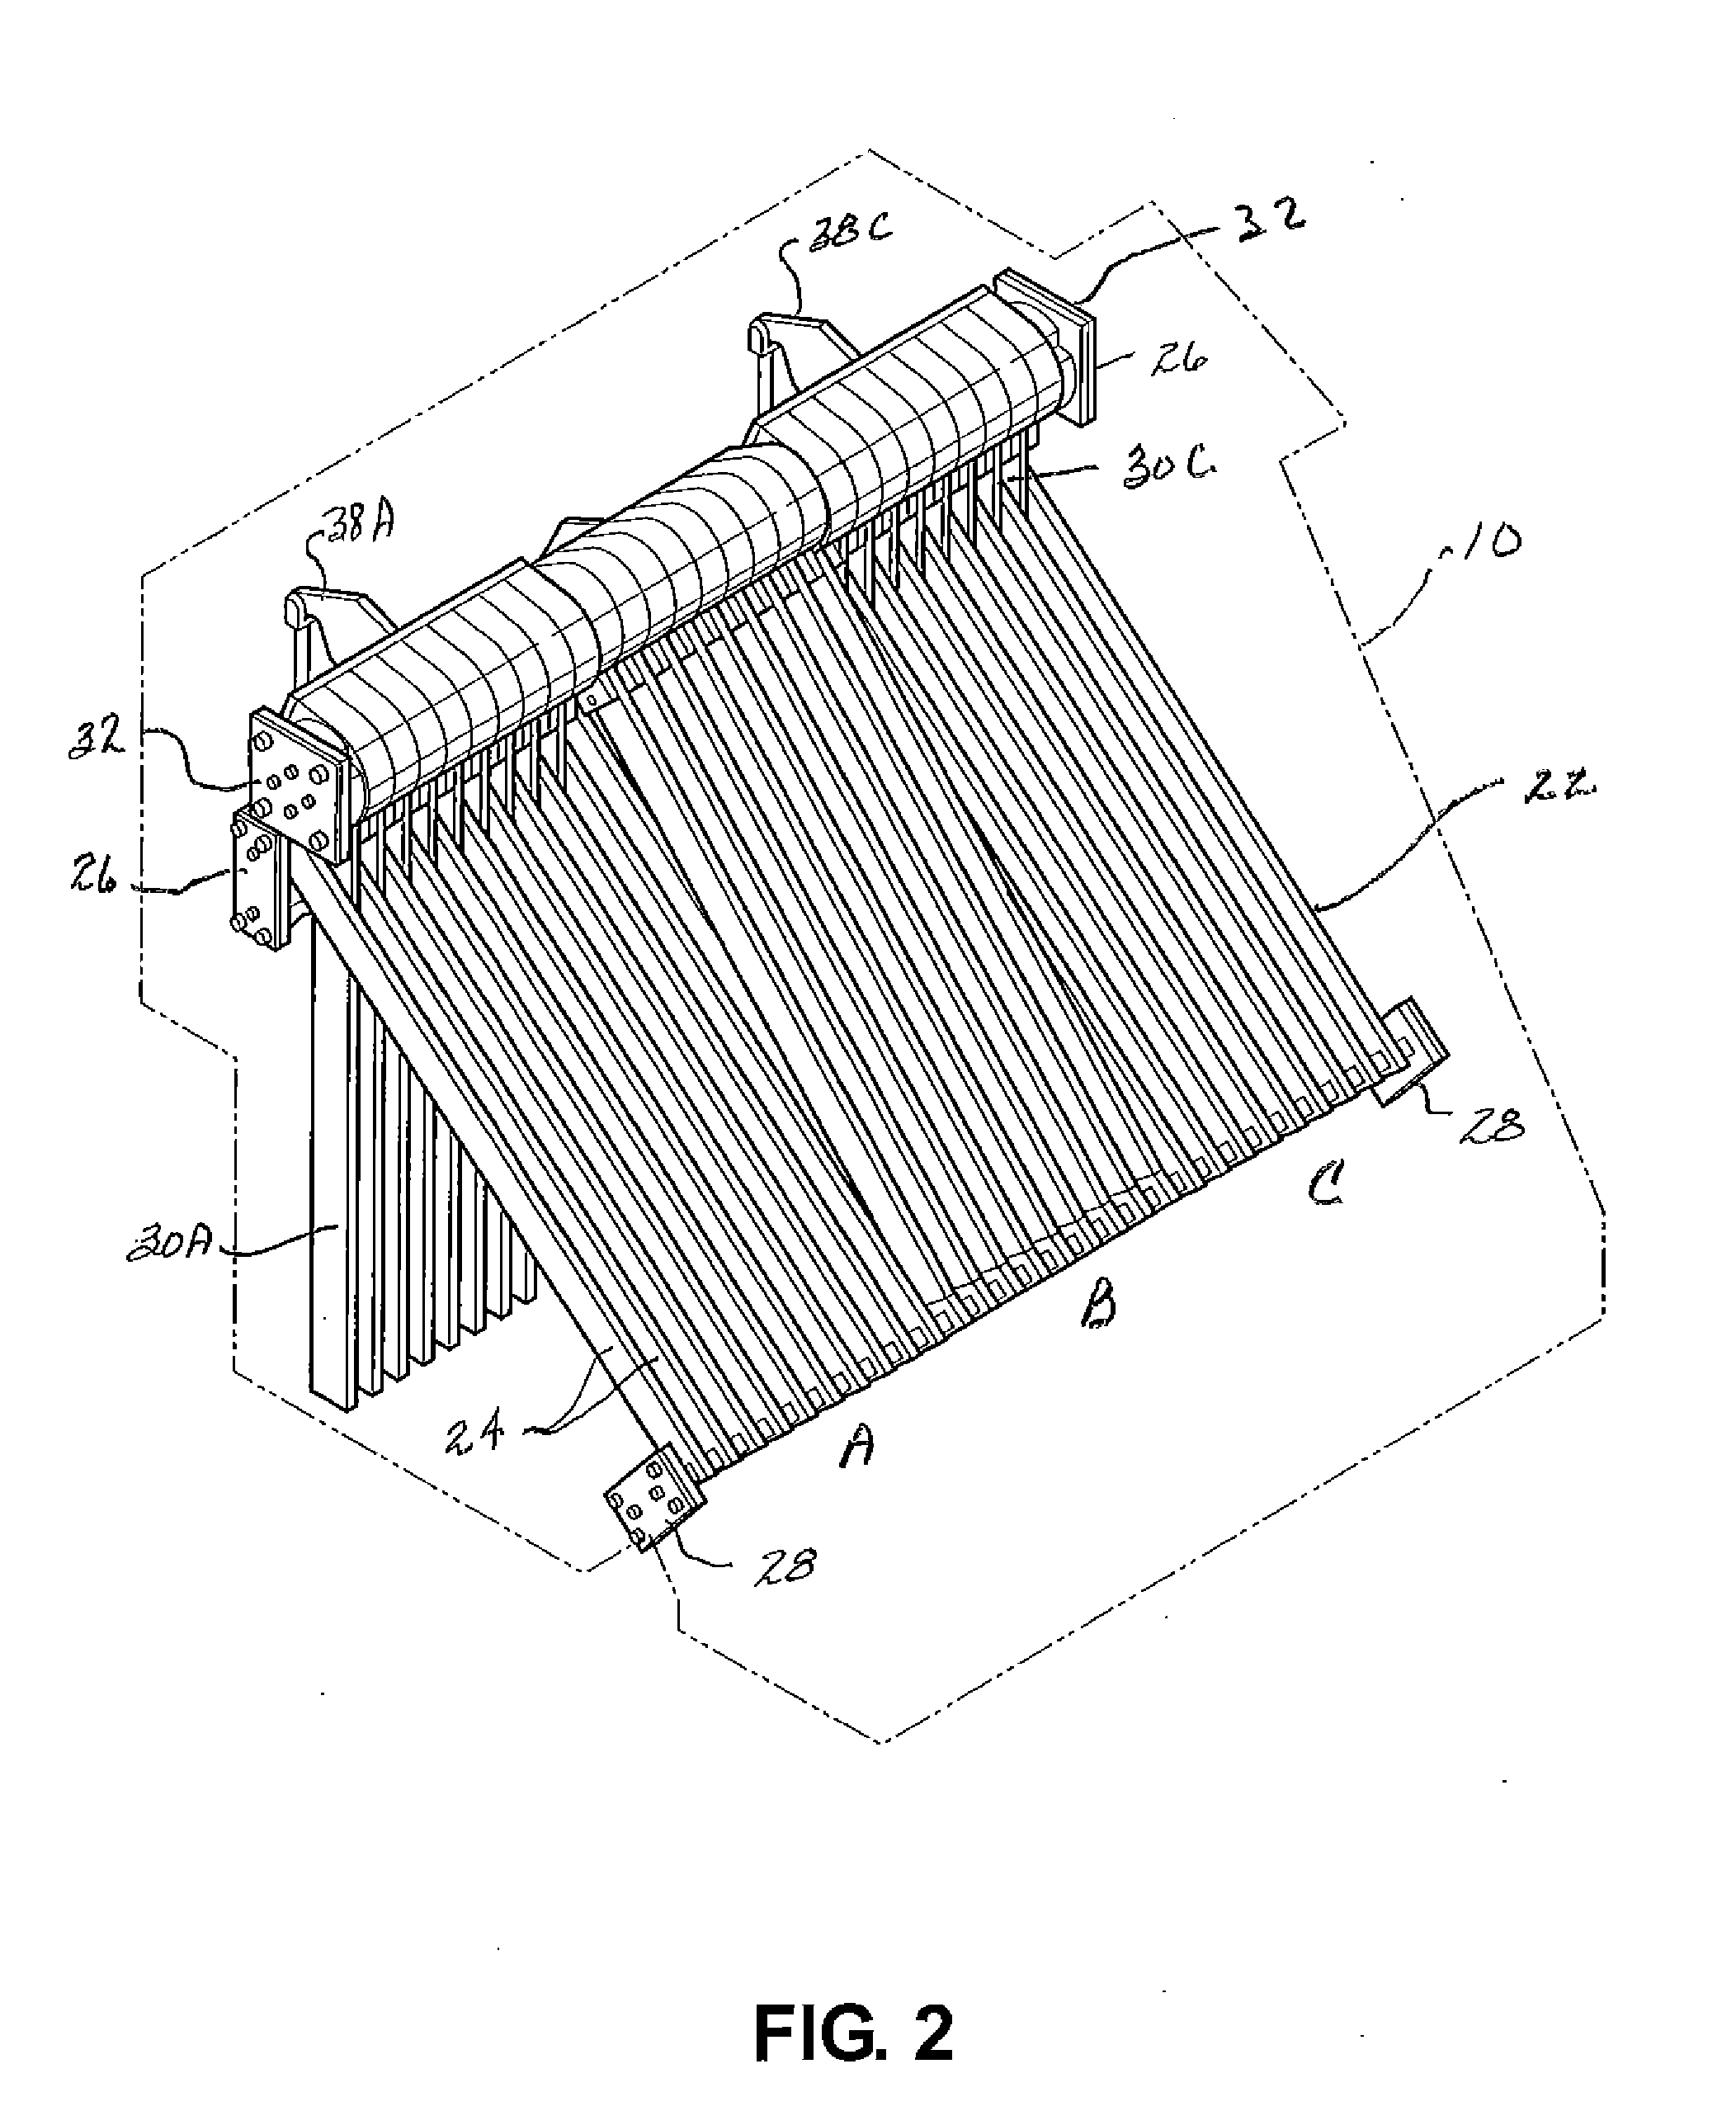 Self-cleaning coal separator grids with multiple cleaning combs